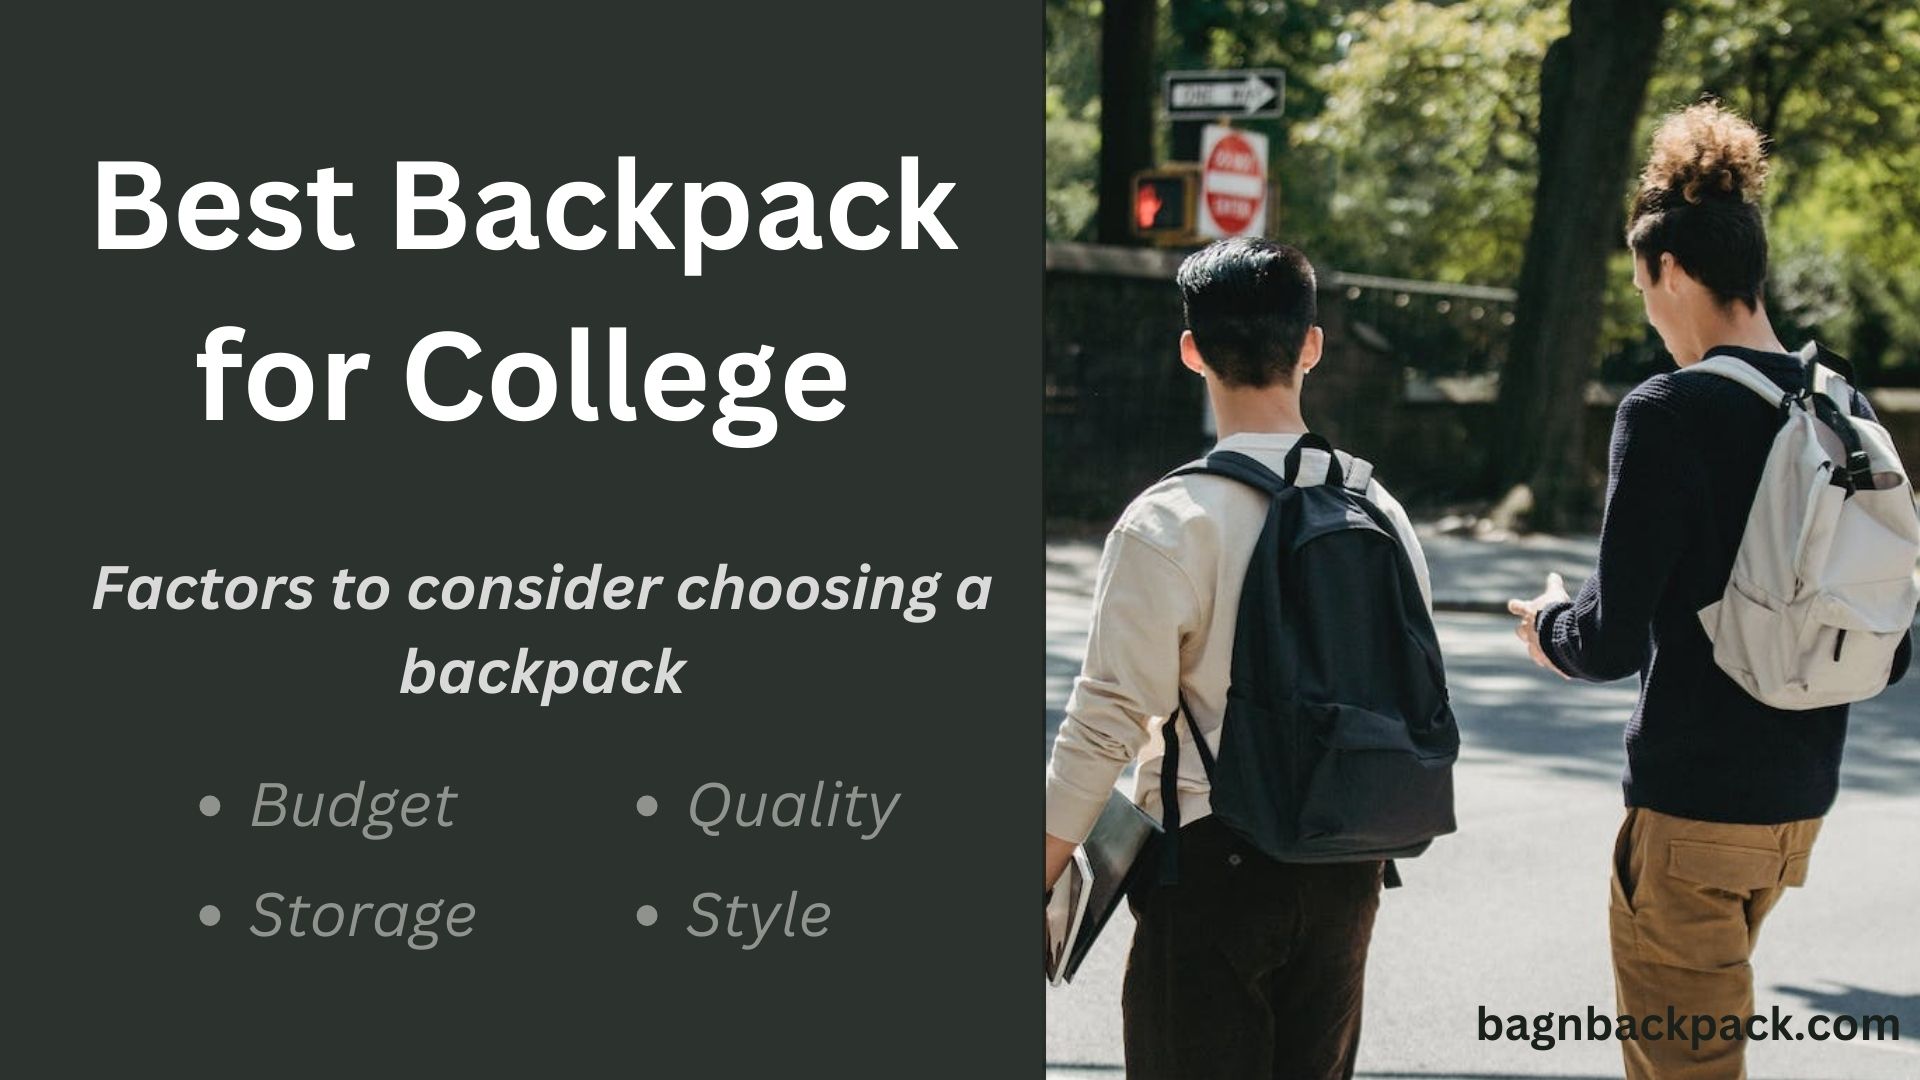 Best Backpack for college